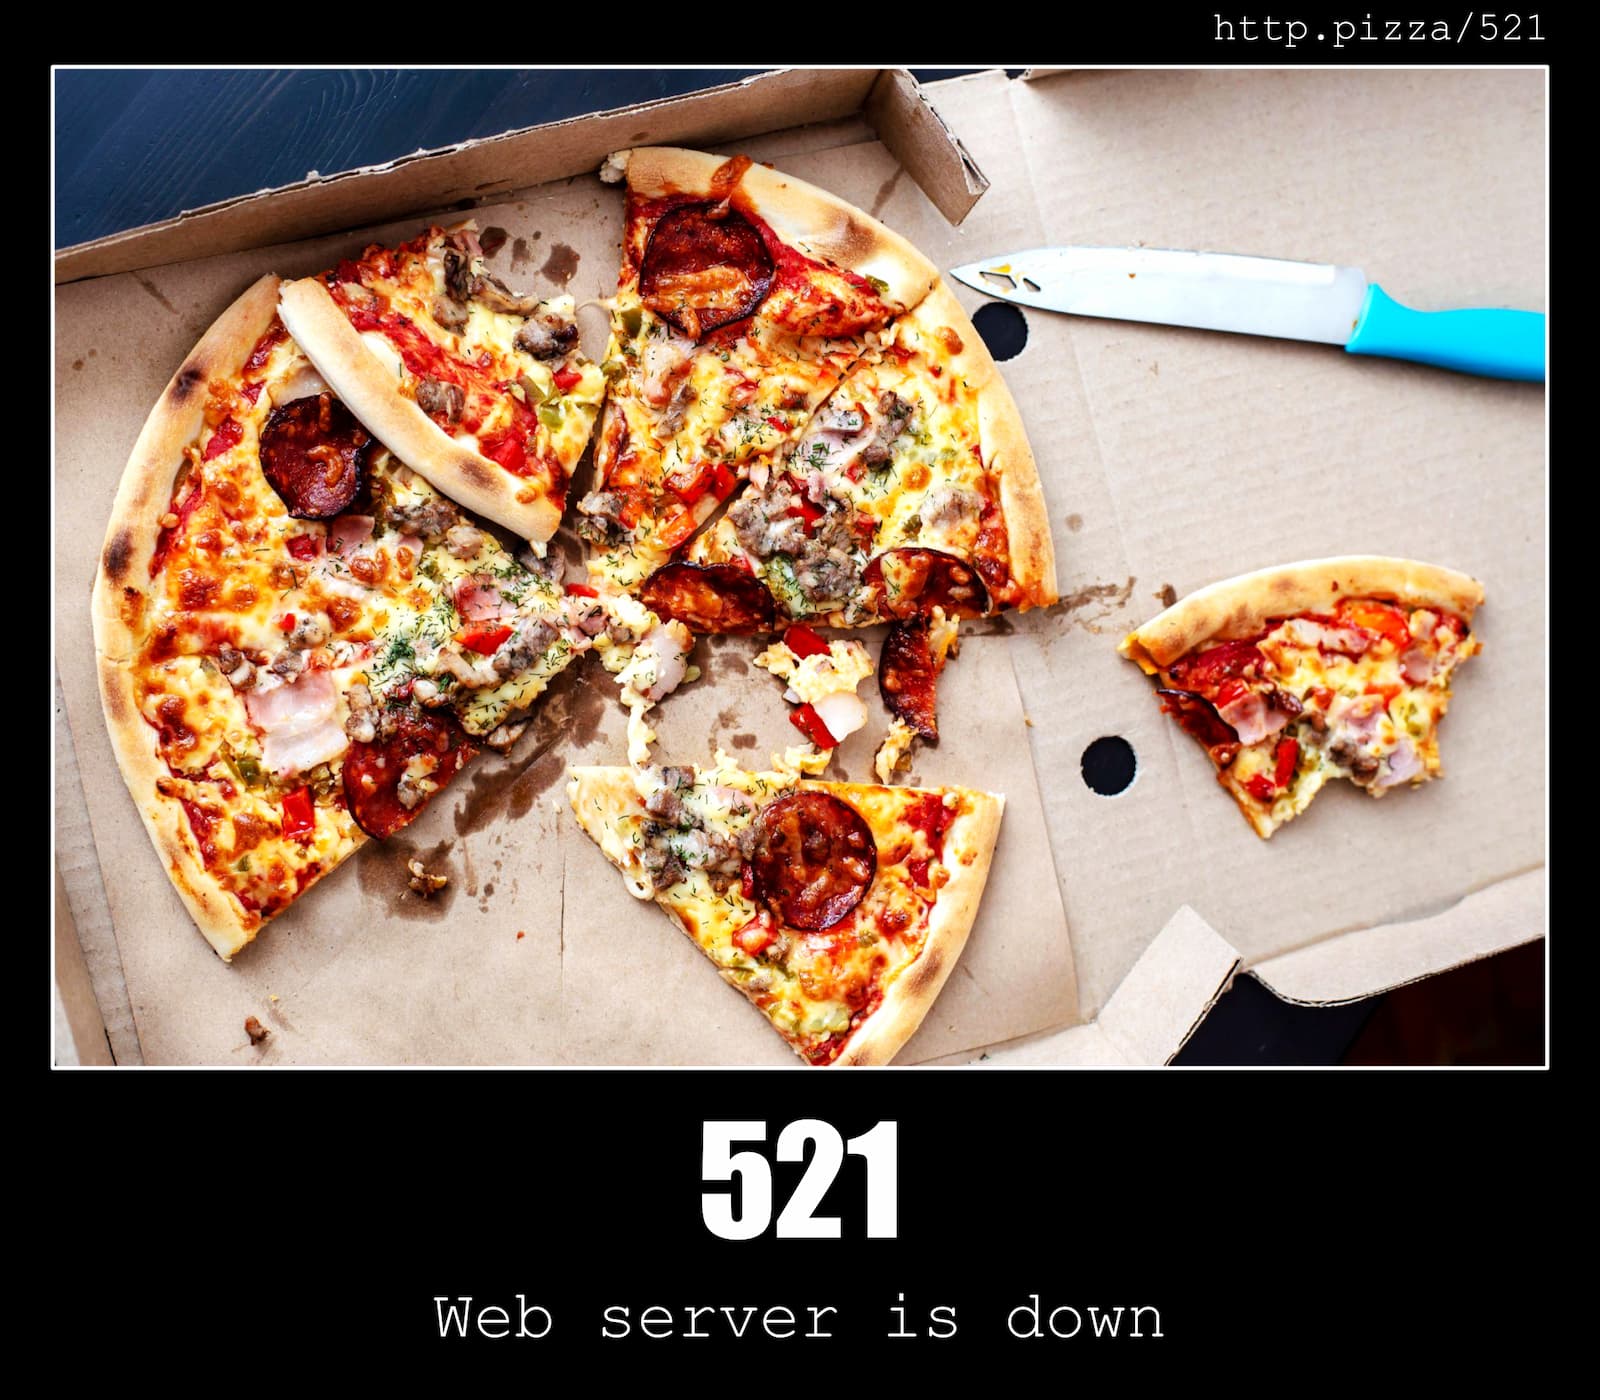 HTTP Status Code 521 Web server is down & Pizzas